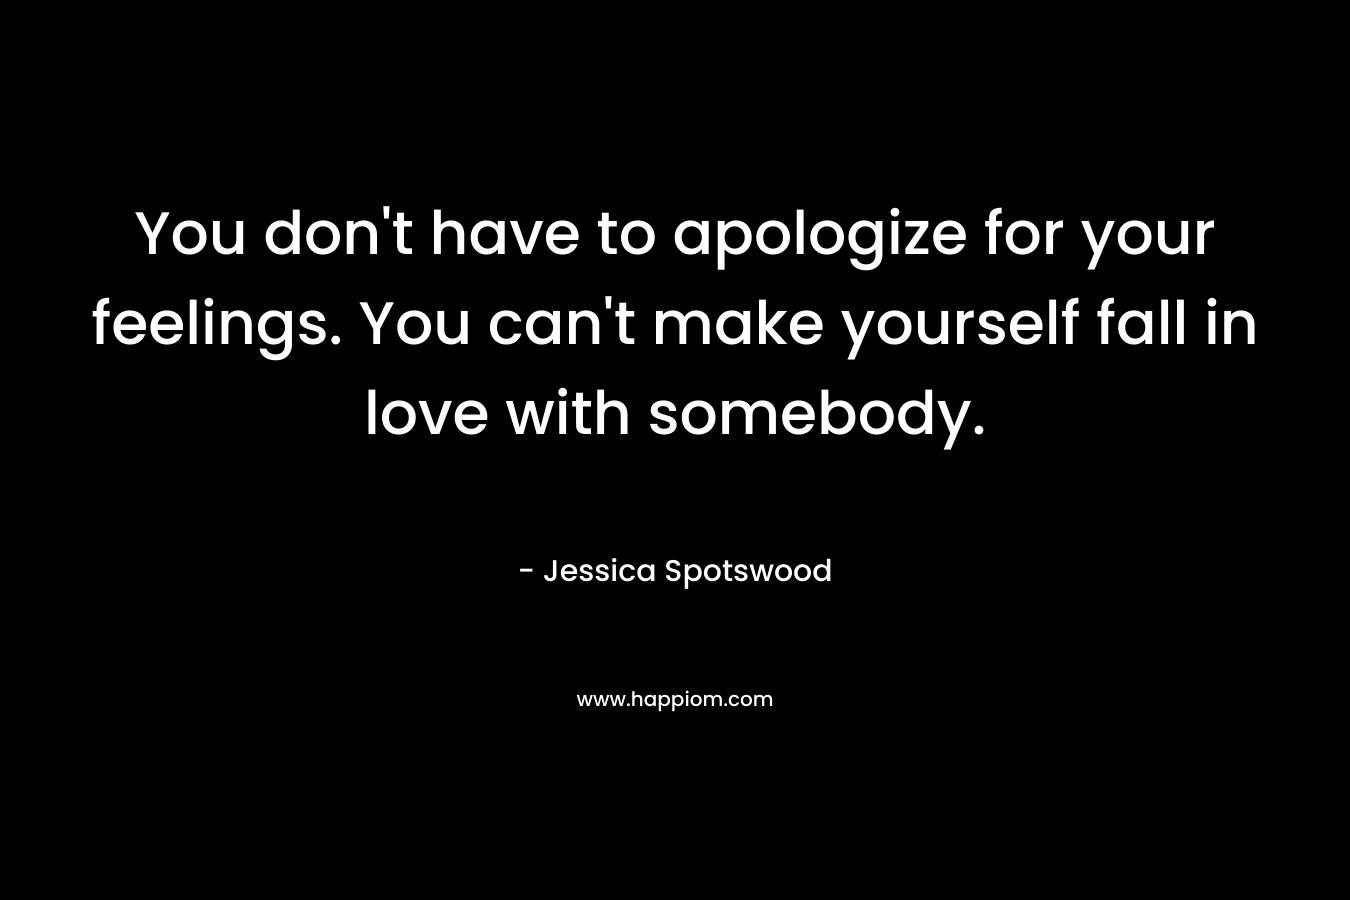 You don't have to apologize for your feelings. You can't make yourself fall in love with somebody.